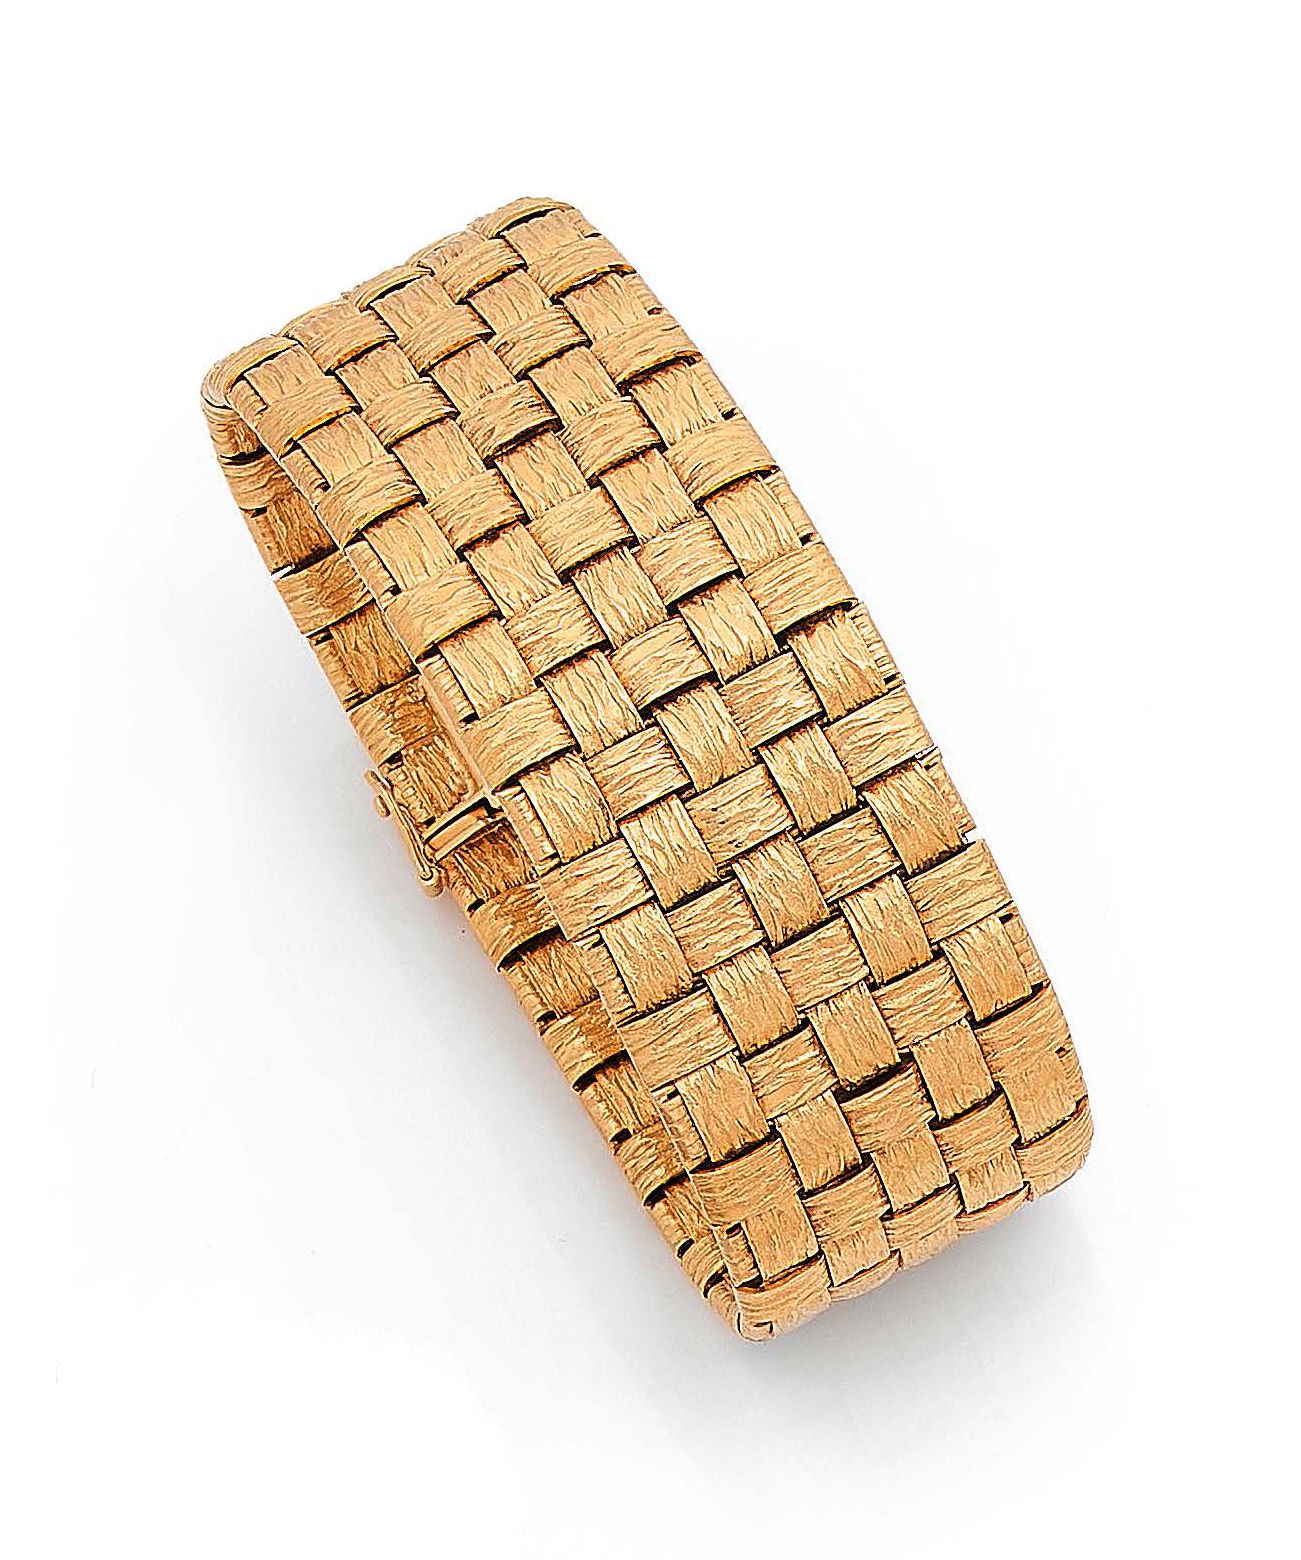 Null Ribbon bracelet in yellow gold (750) textured and amati mesh basketry.
Ratc&hellip;